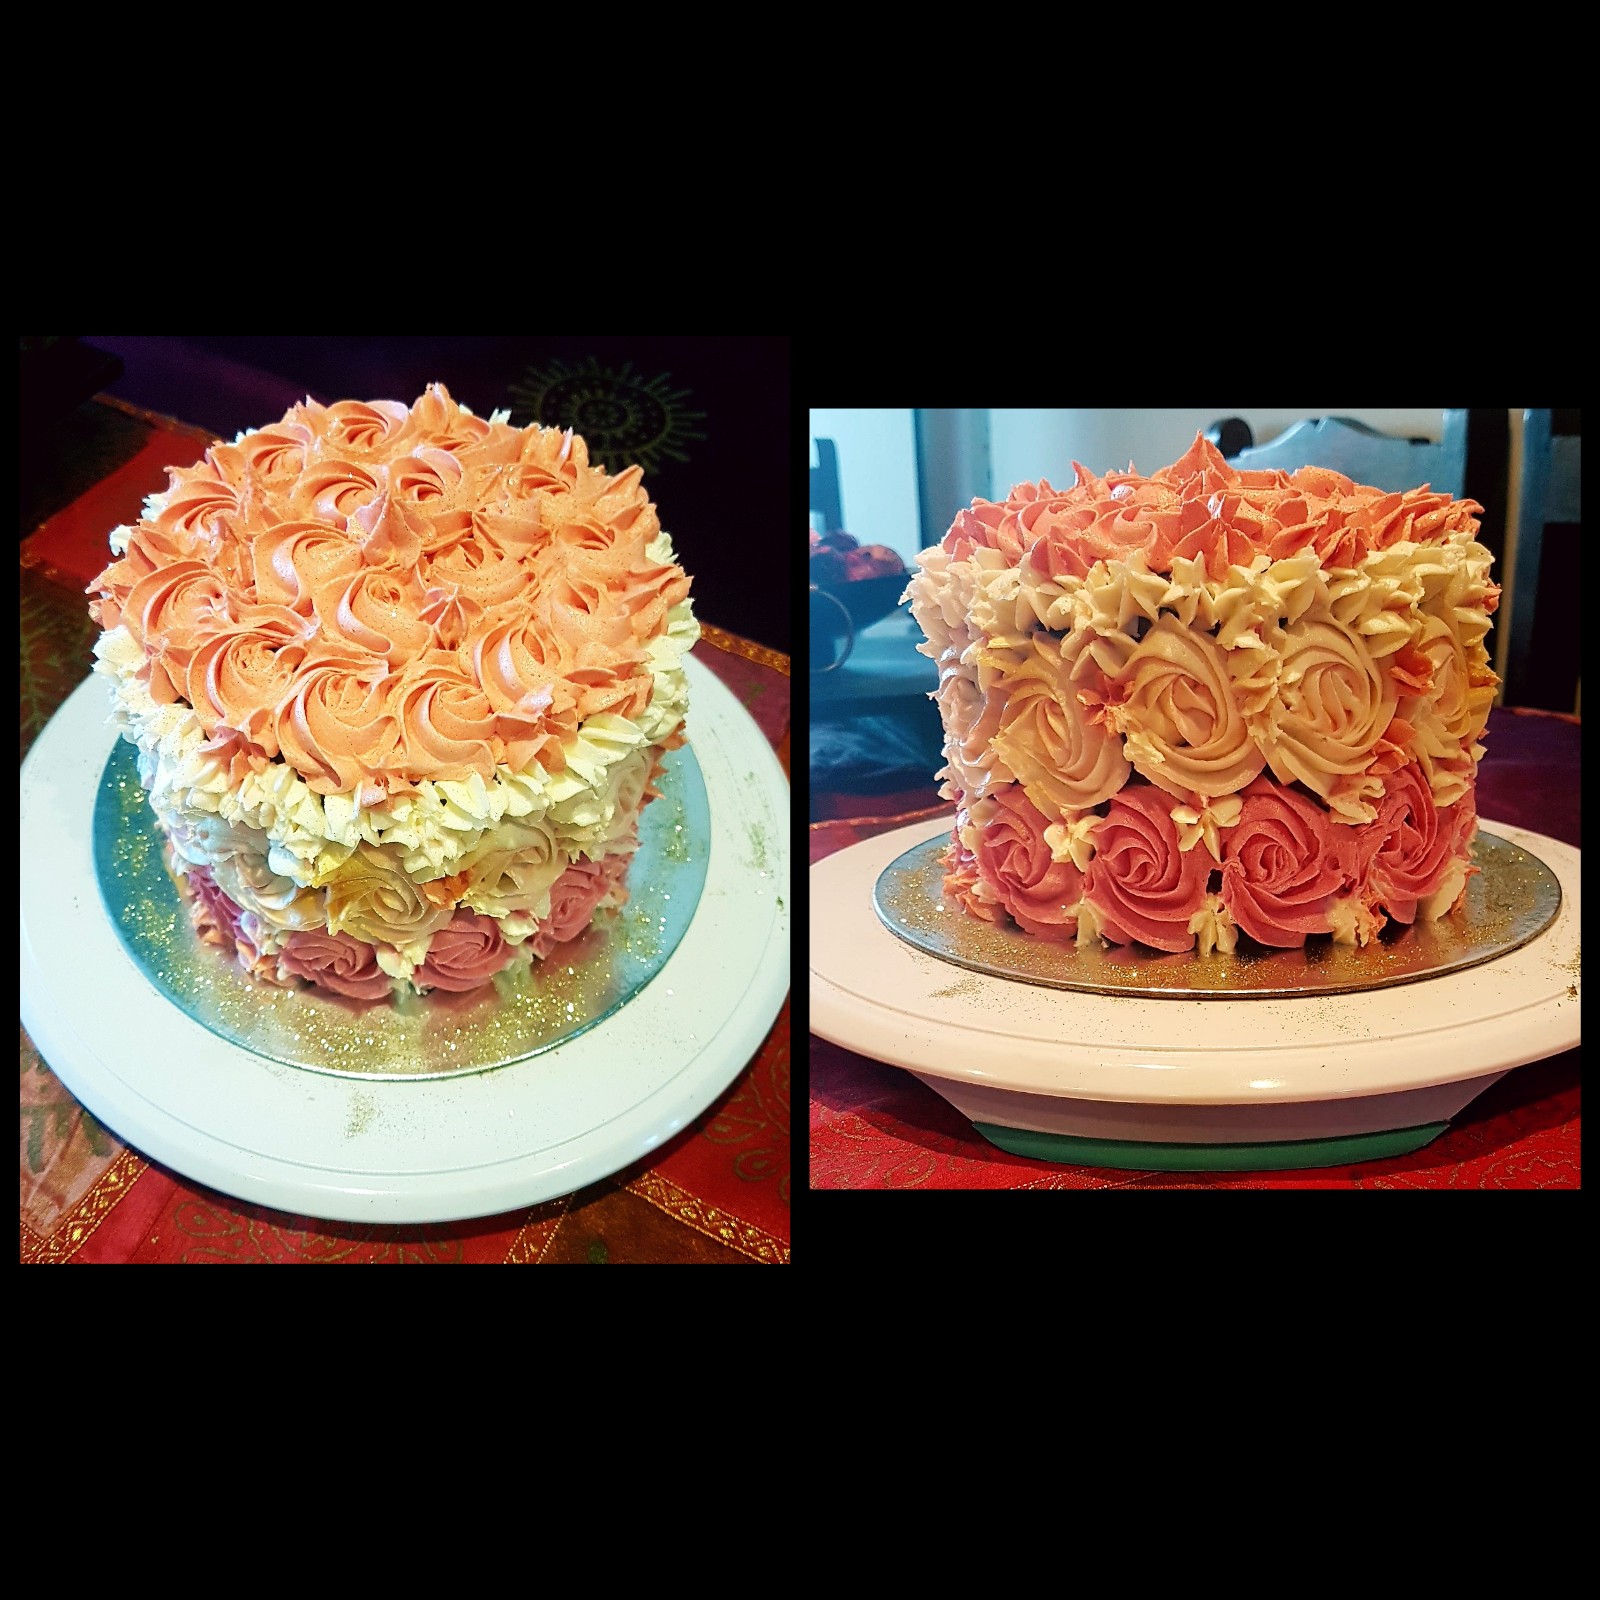 A 3 layered chocolate cake with buttercream of rose swirls..ugadi special!